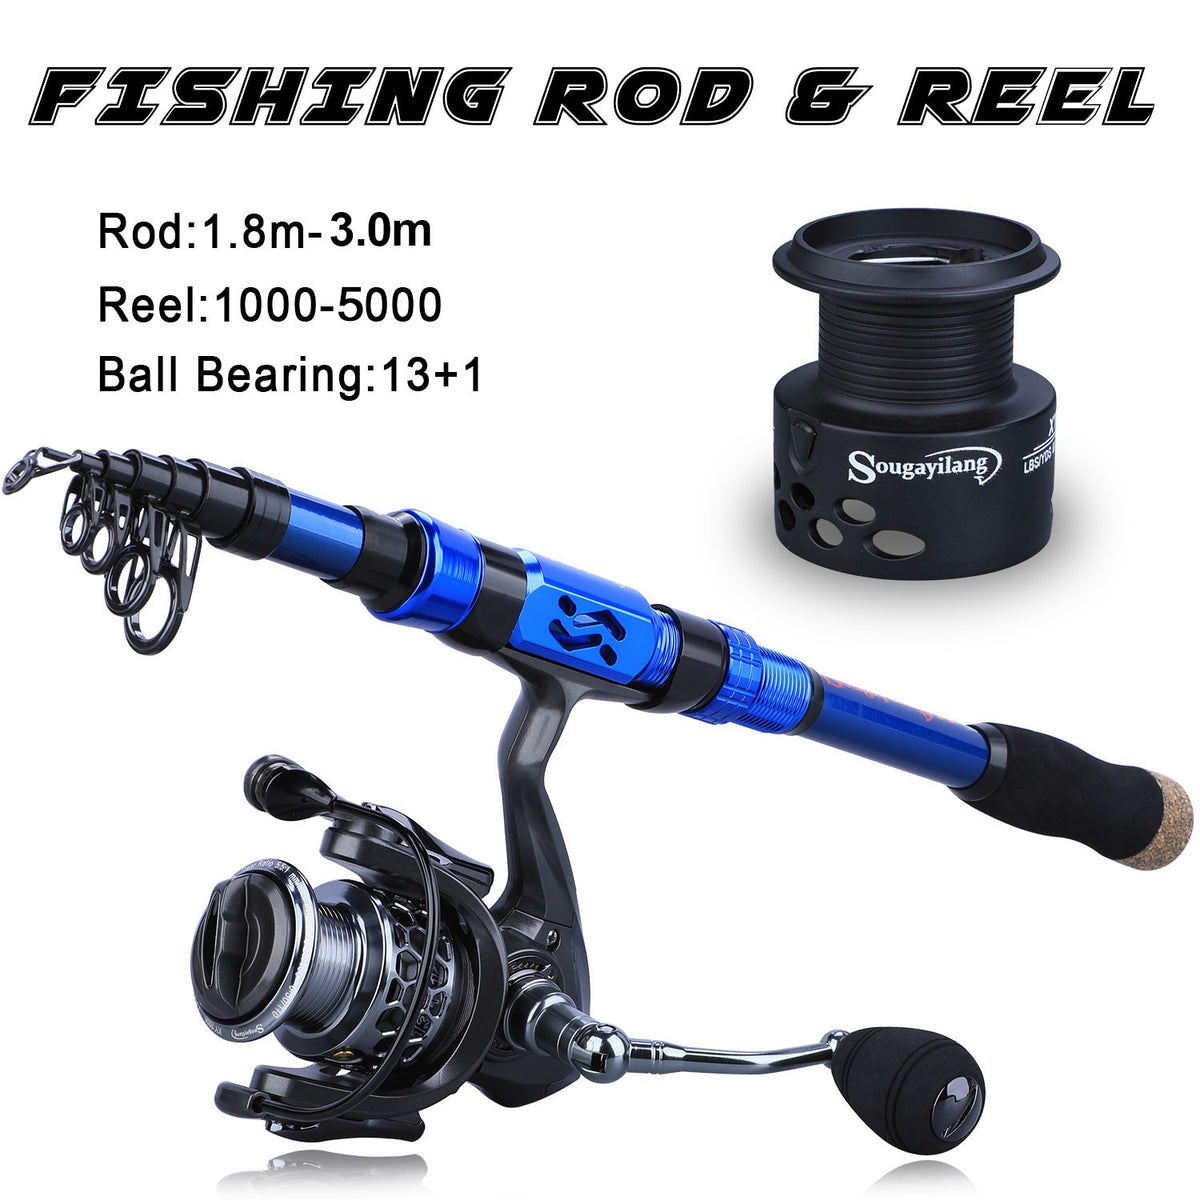 Sougayilang Top Quality 1.8M-3.0M Fishing Rod Reel Combo Carbon Fiber  Telescopic Fishing Pole and 13+1BB 5.5:1 Spinning Reel Set